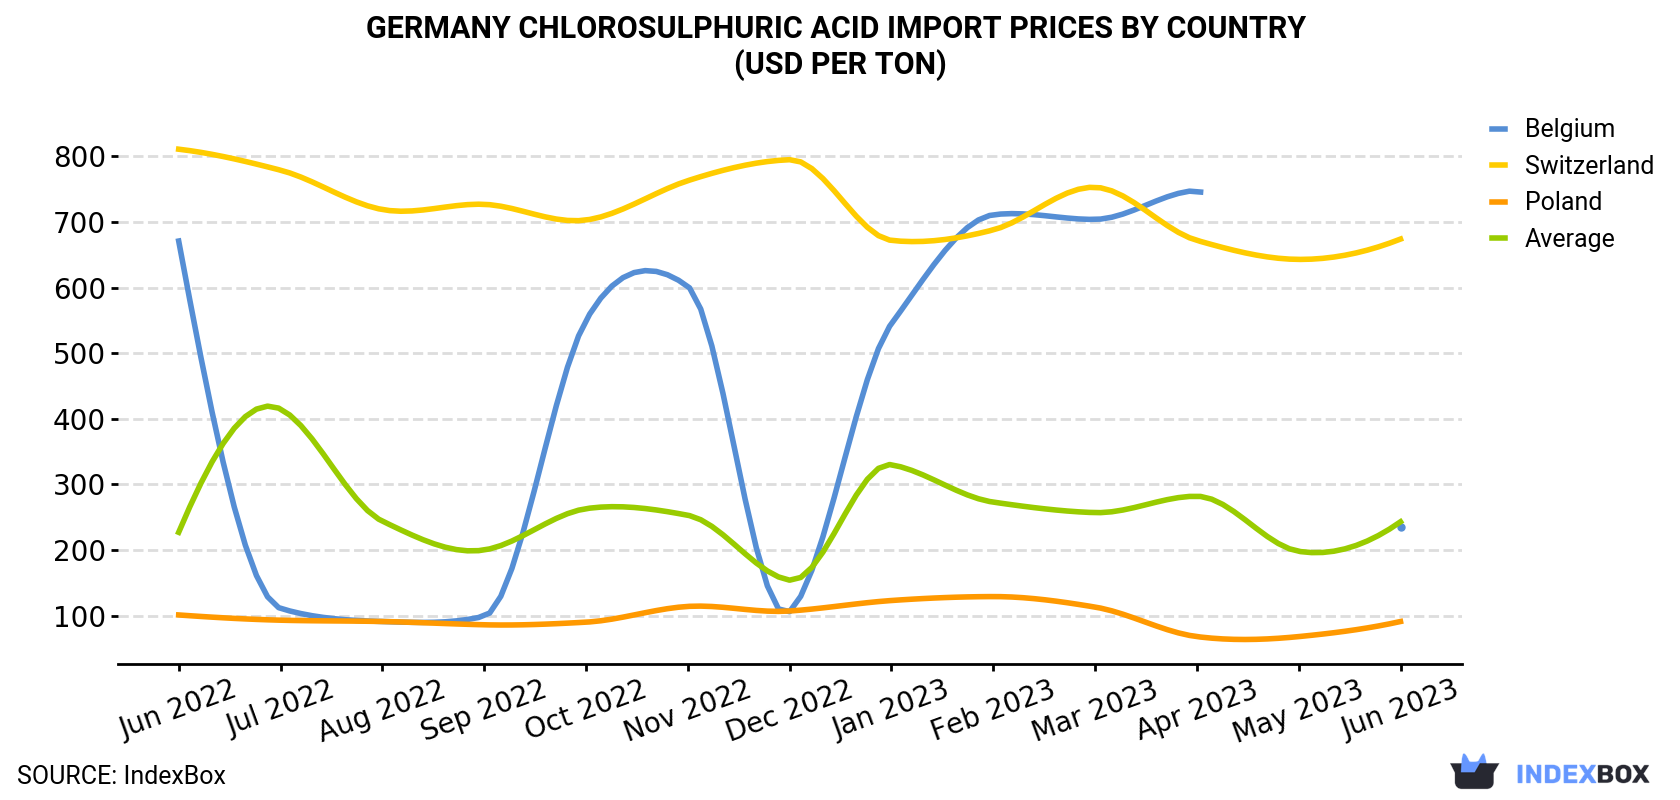 Germany Chlorosulphuric Acid Import Prices By Country (USD Per Ton)